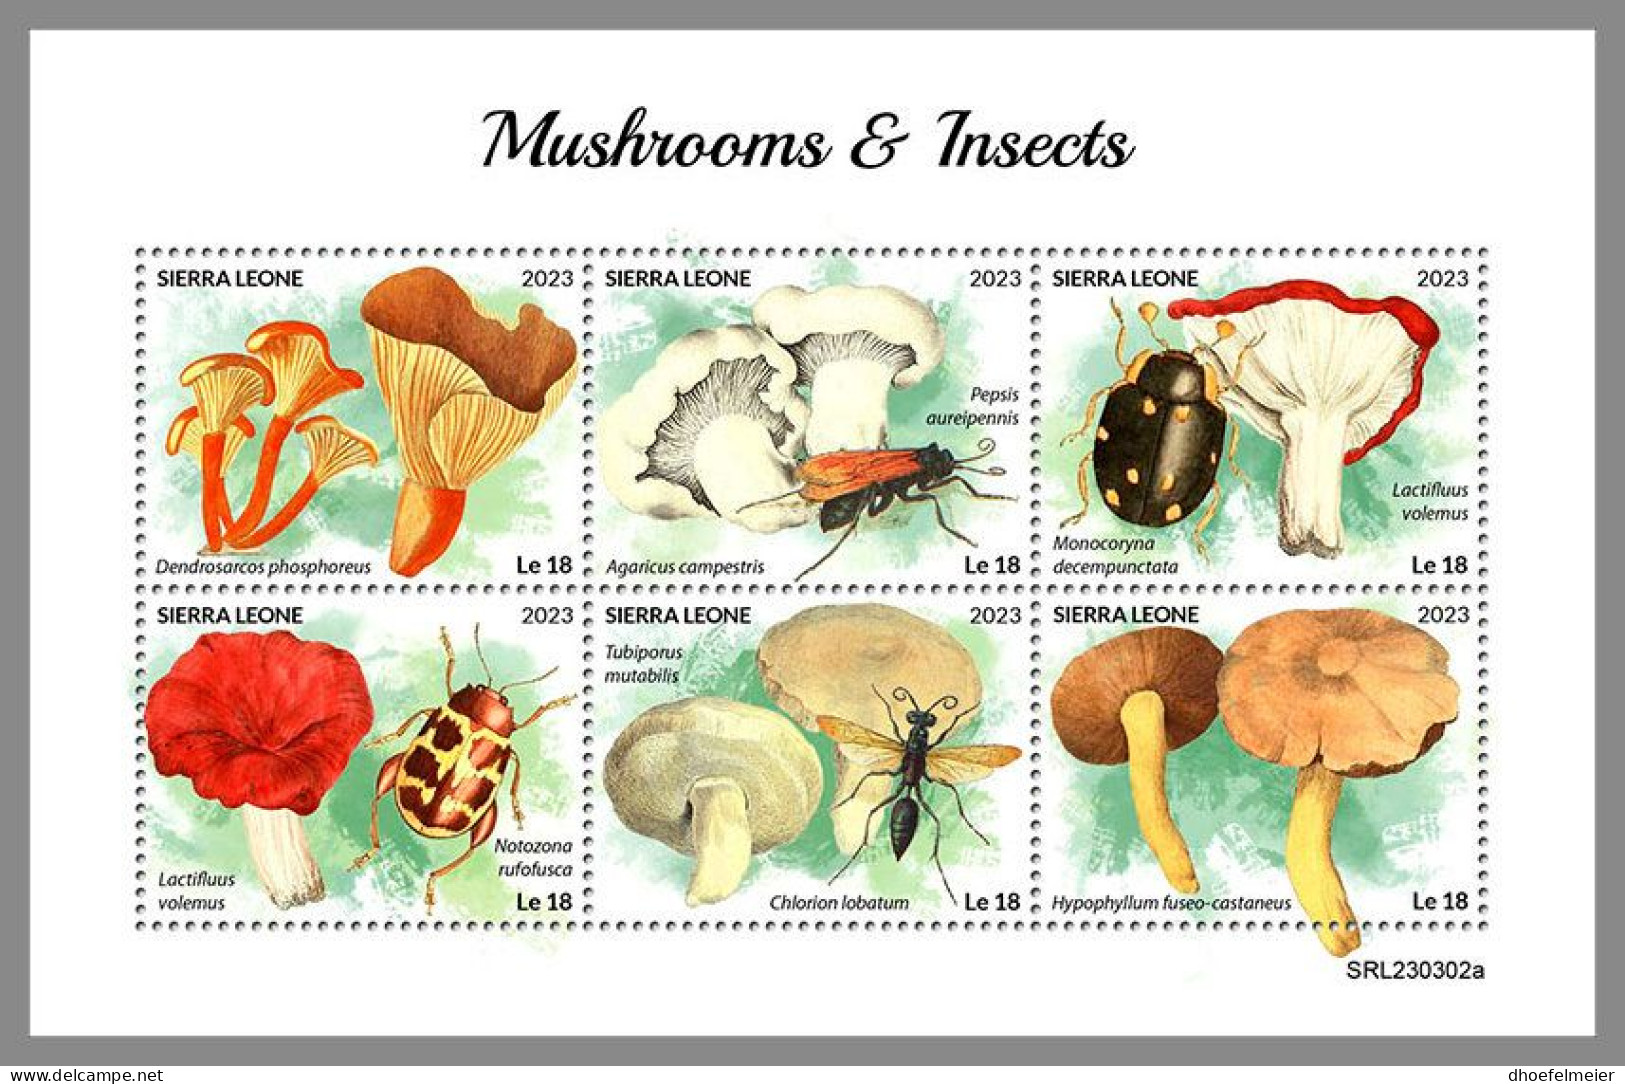 SIERRA LEONE 2023 MNH Mushrooms & Insects Pilze & Insekten M/S – IMPERFORATED – DHQ2418 - Pilze